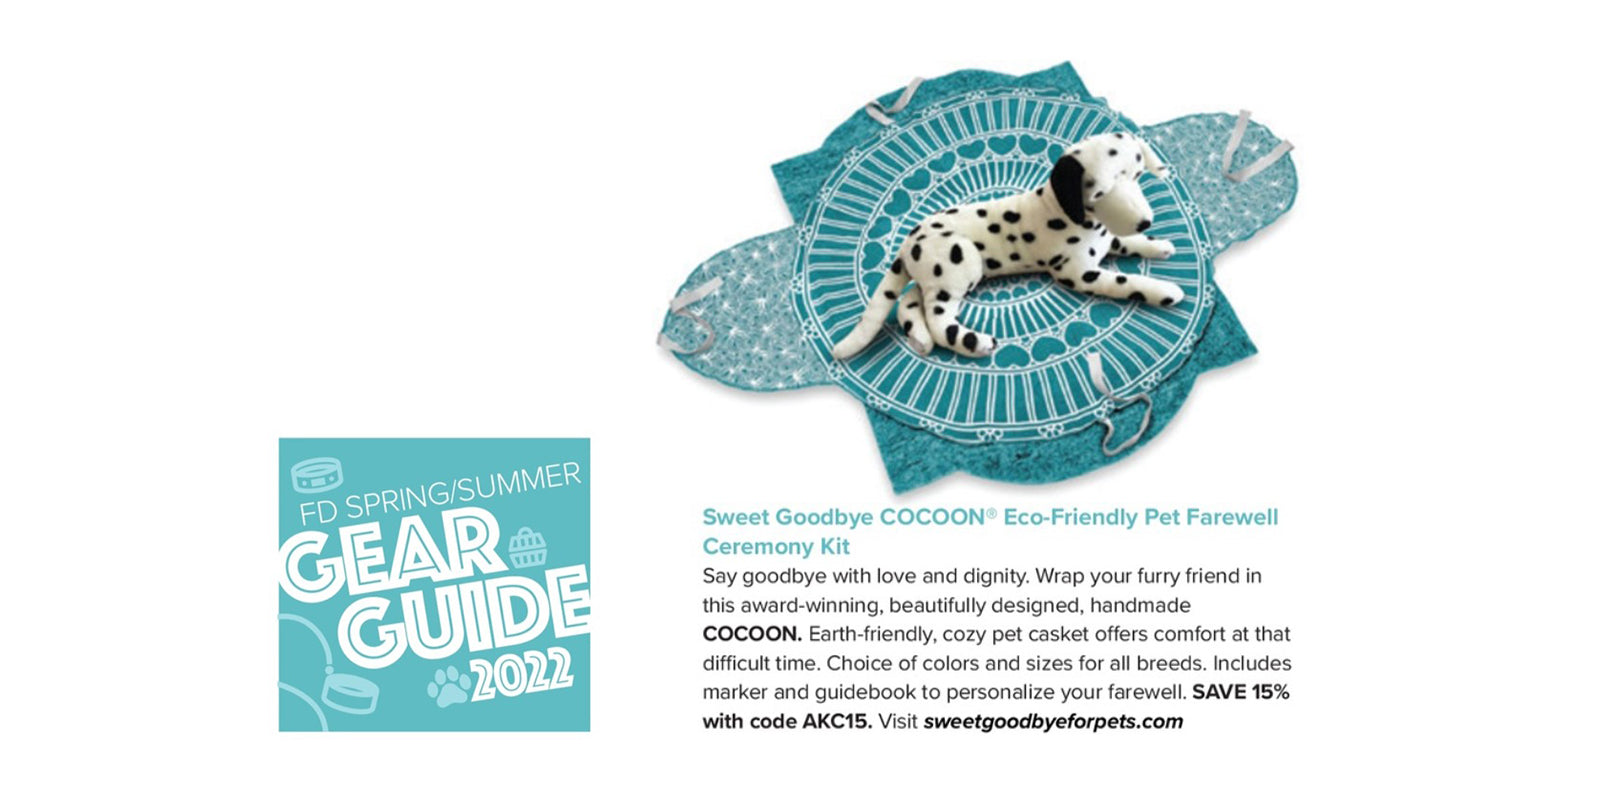 AKC Family Dog Gear Guide 2022 features Sweet Goodbye